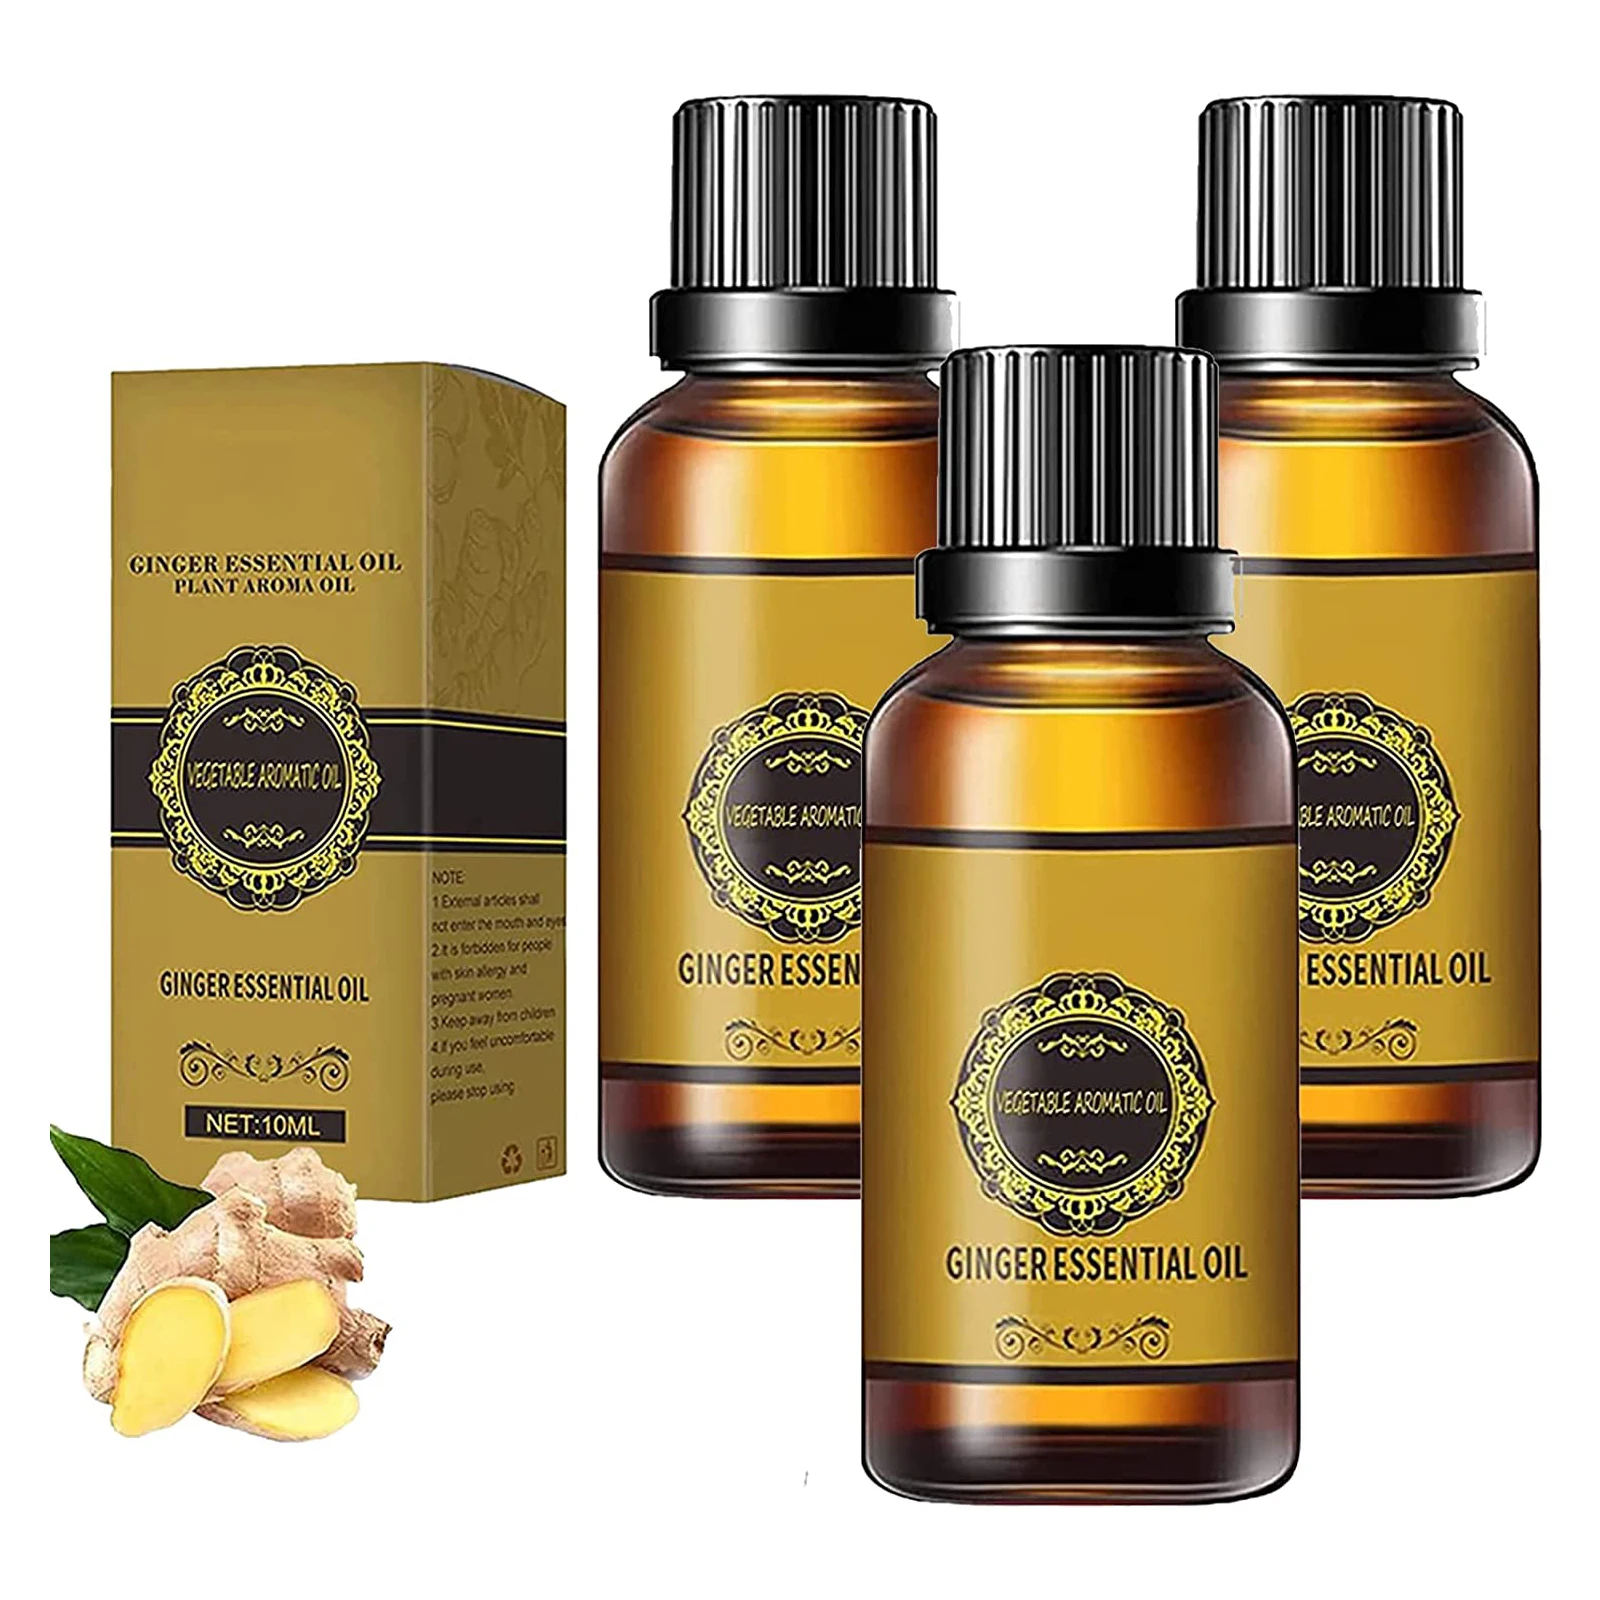 

eelhoe OEM Ginger essential oil 3 bottle 10ml plant wholesale factory aromatherapy body massage humidifier water-soluble skin